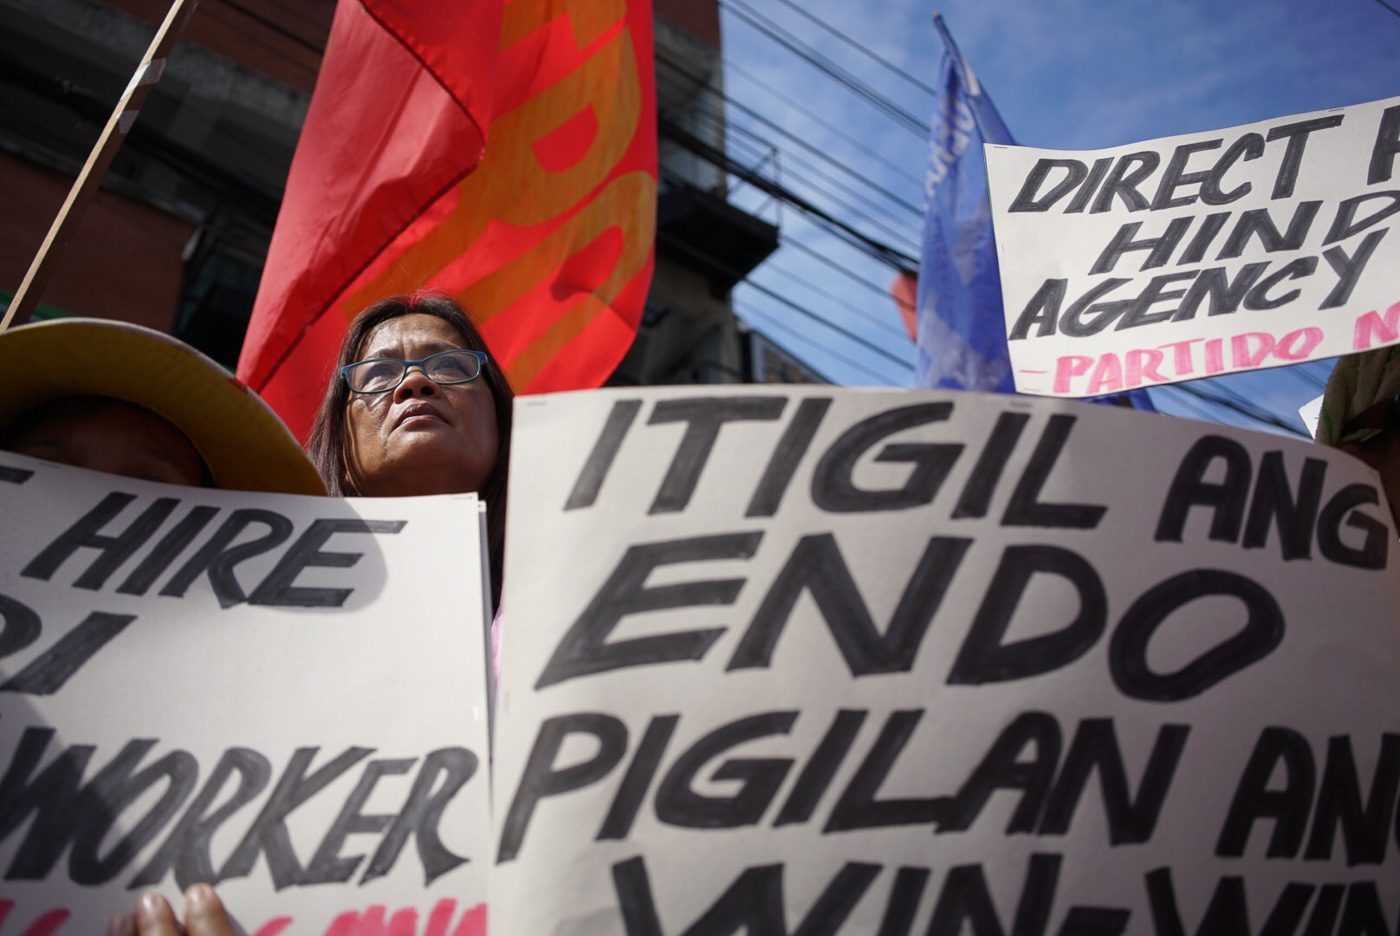 After Duterte’s veto, labor groups vow to continue fight vs endo